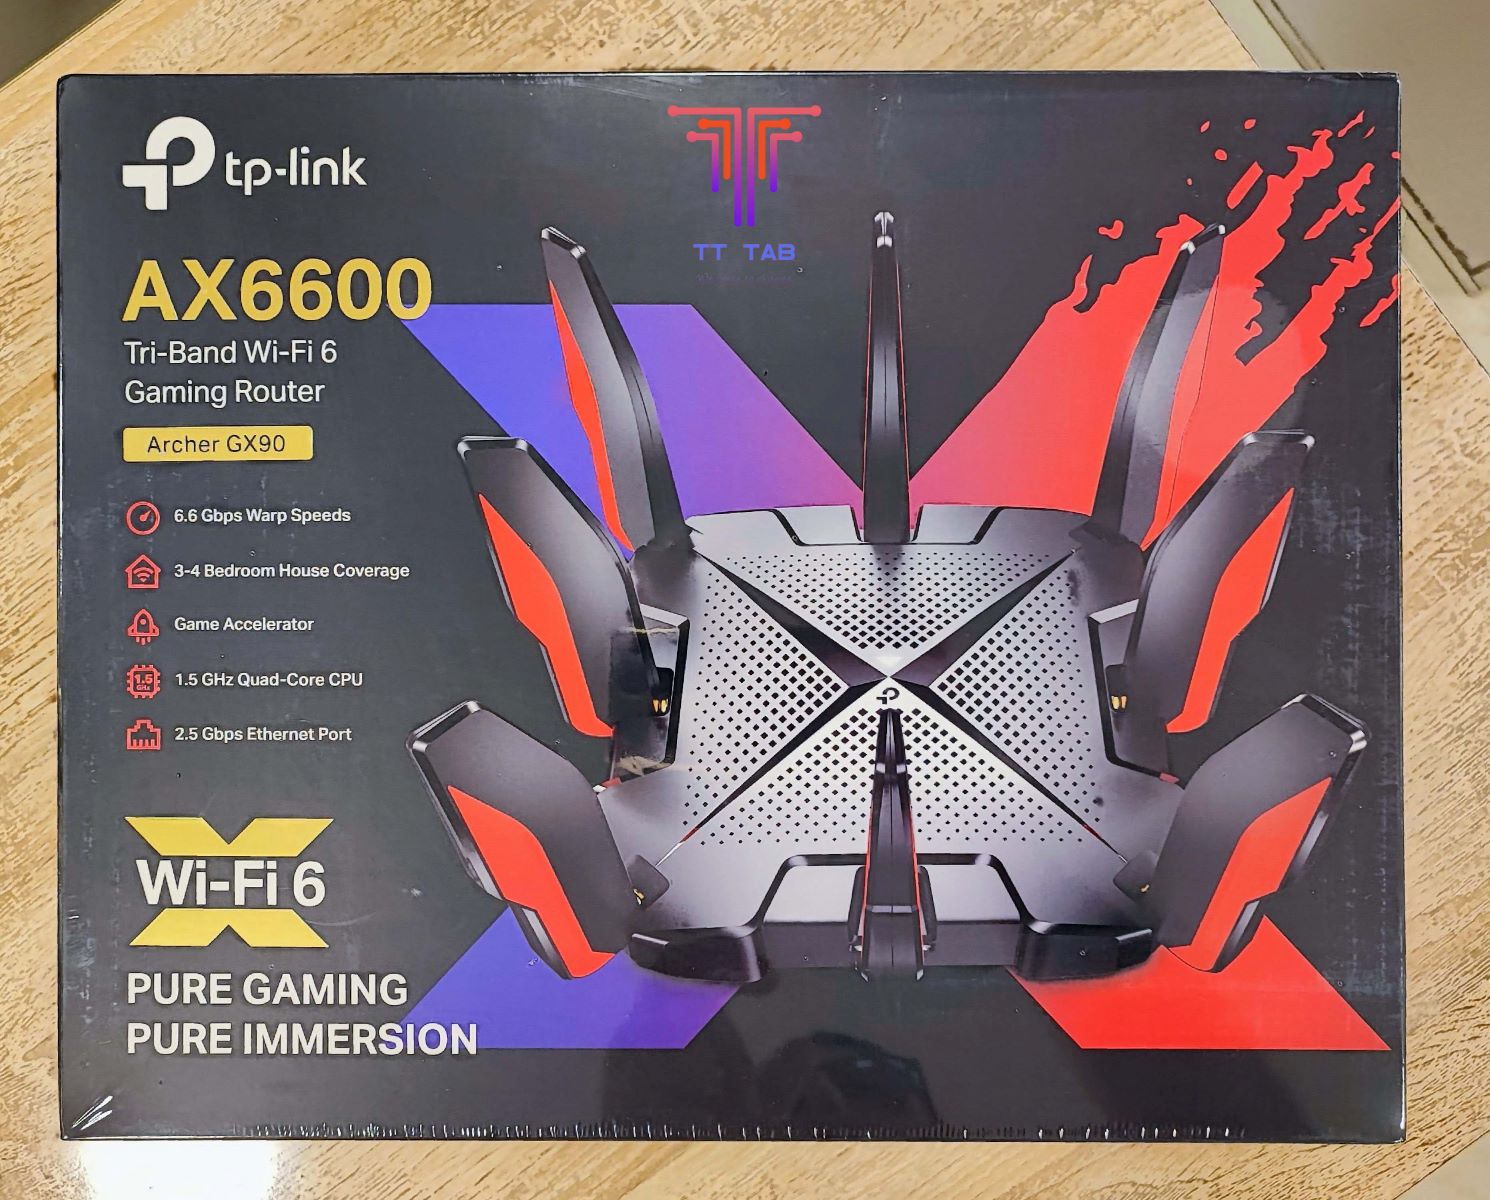 TP-Link Archer GX90 AX6600 Gaming Router